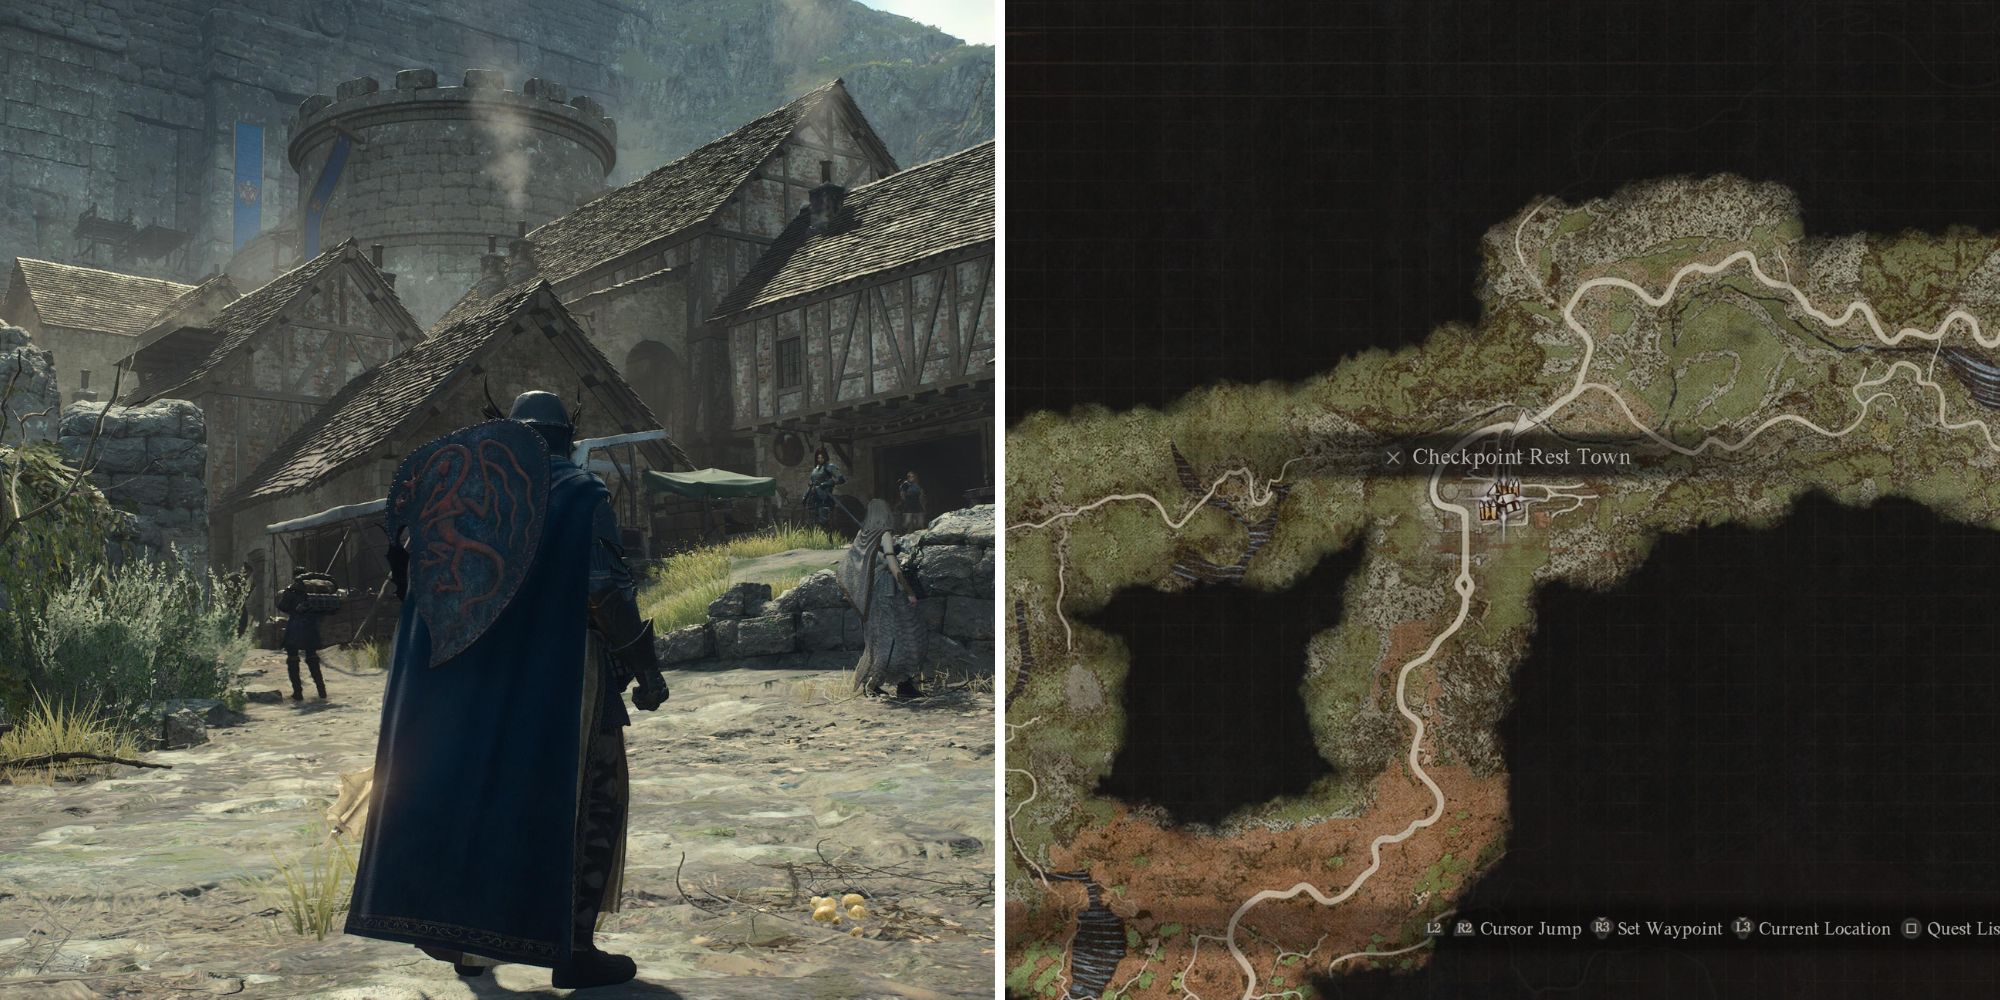 The Player Standing In Checkpoint Rest Town & The Location On The Map 